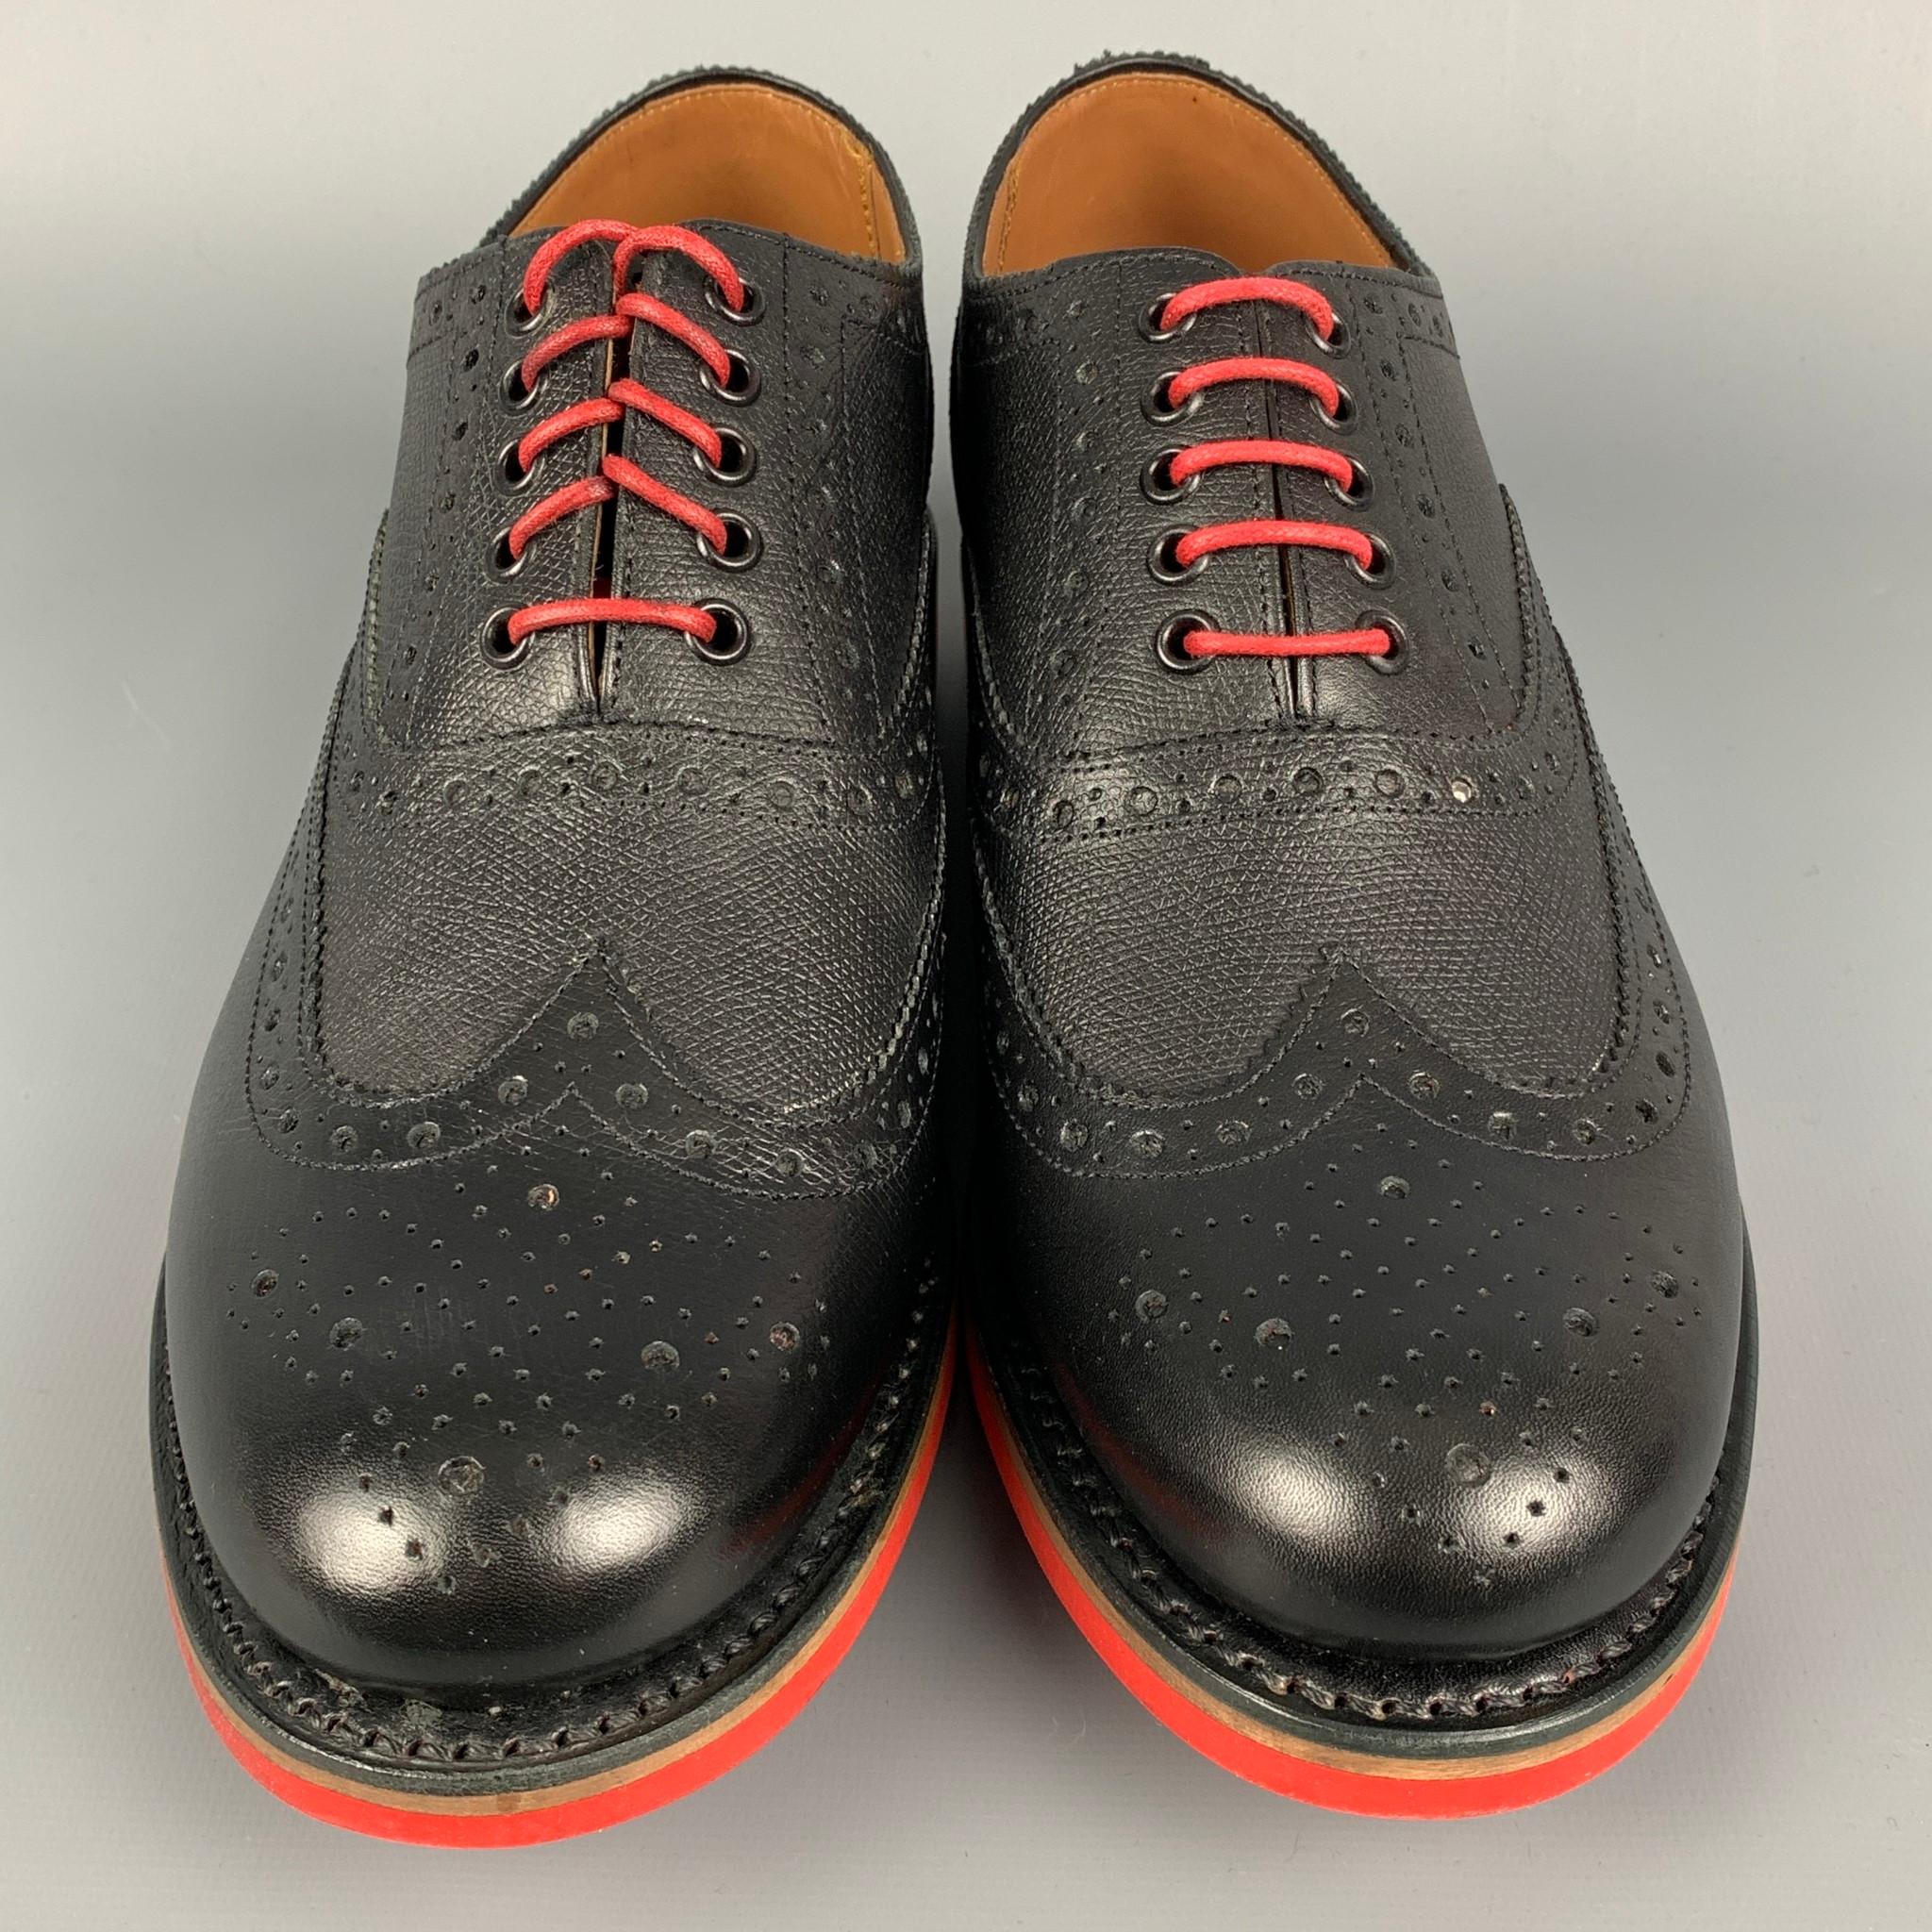 Men's GRENSON Size 8.5 Black & Red Perforated Leather Wingtip Lace Up Shoes